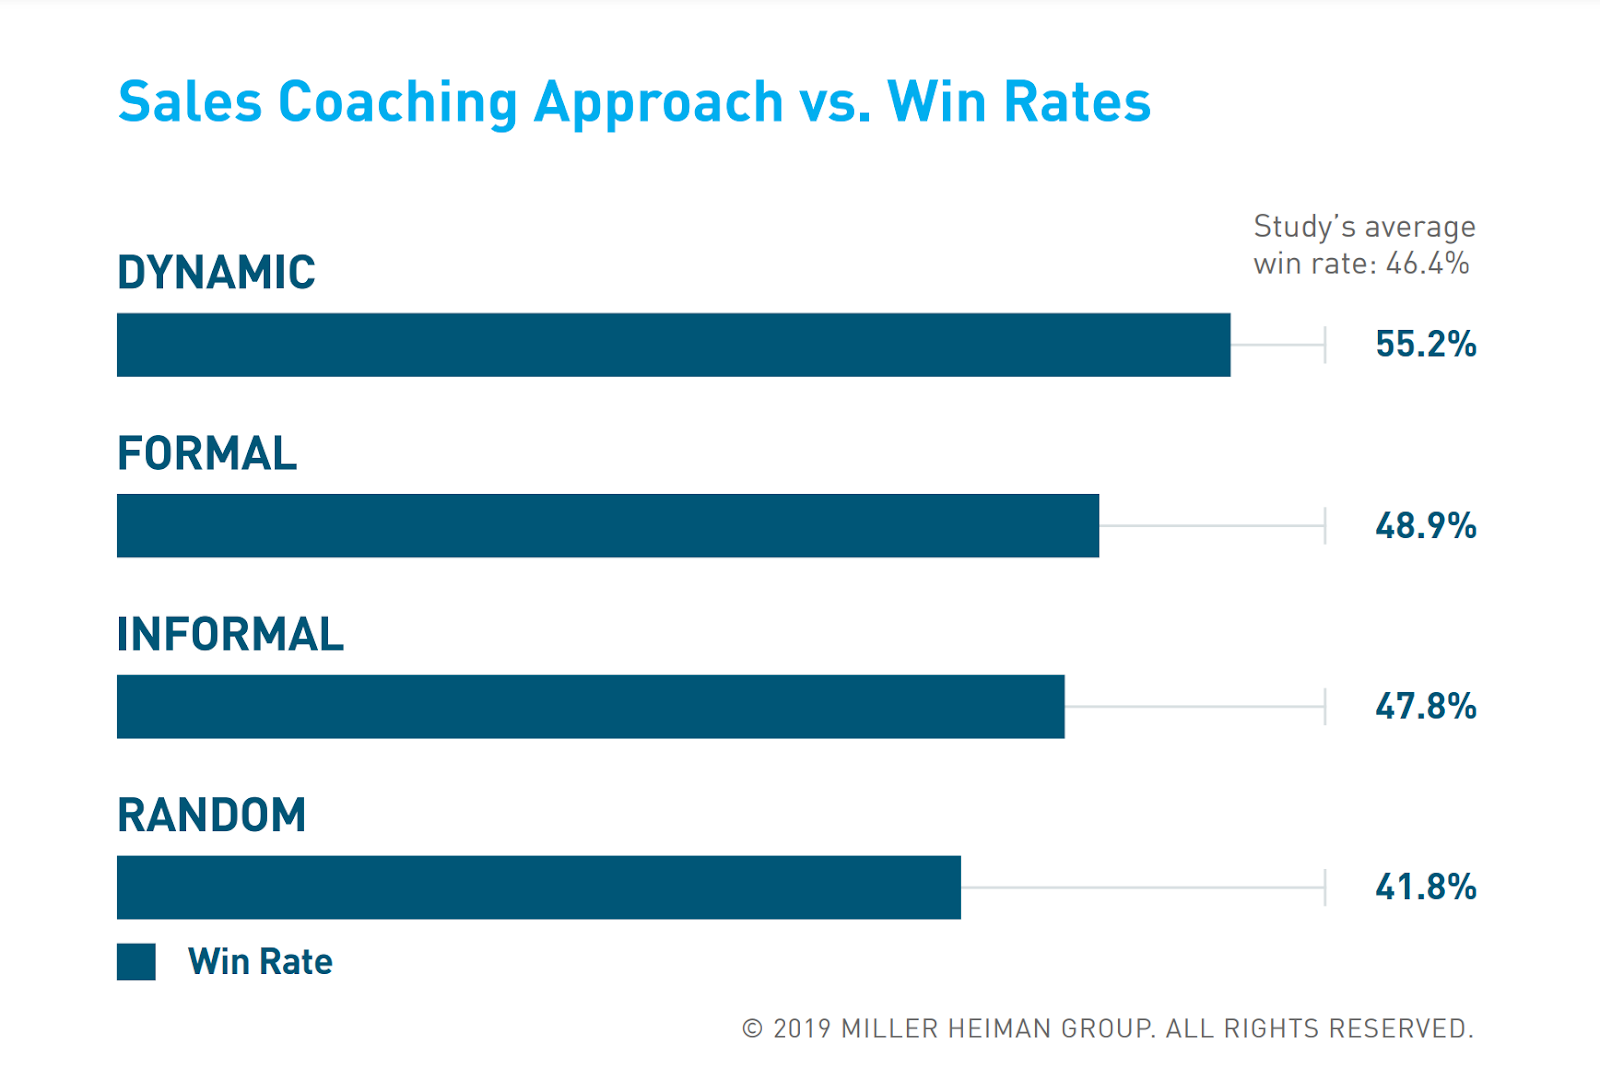 Sales Coaching Approche vs. Win Rates